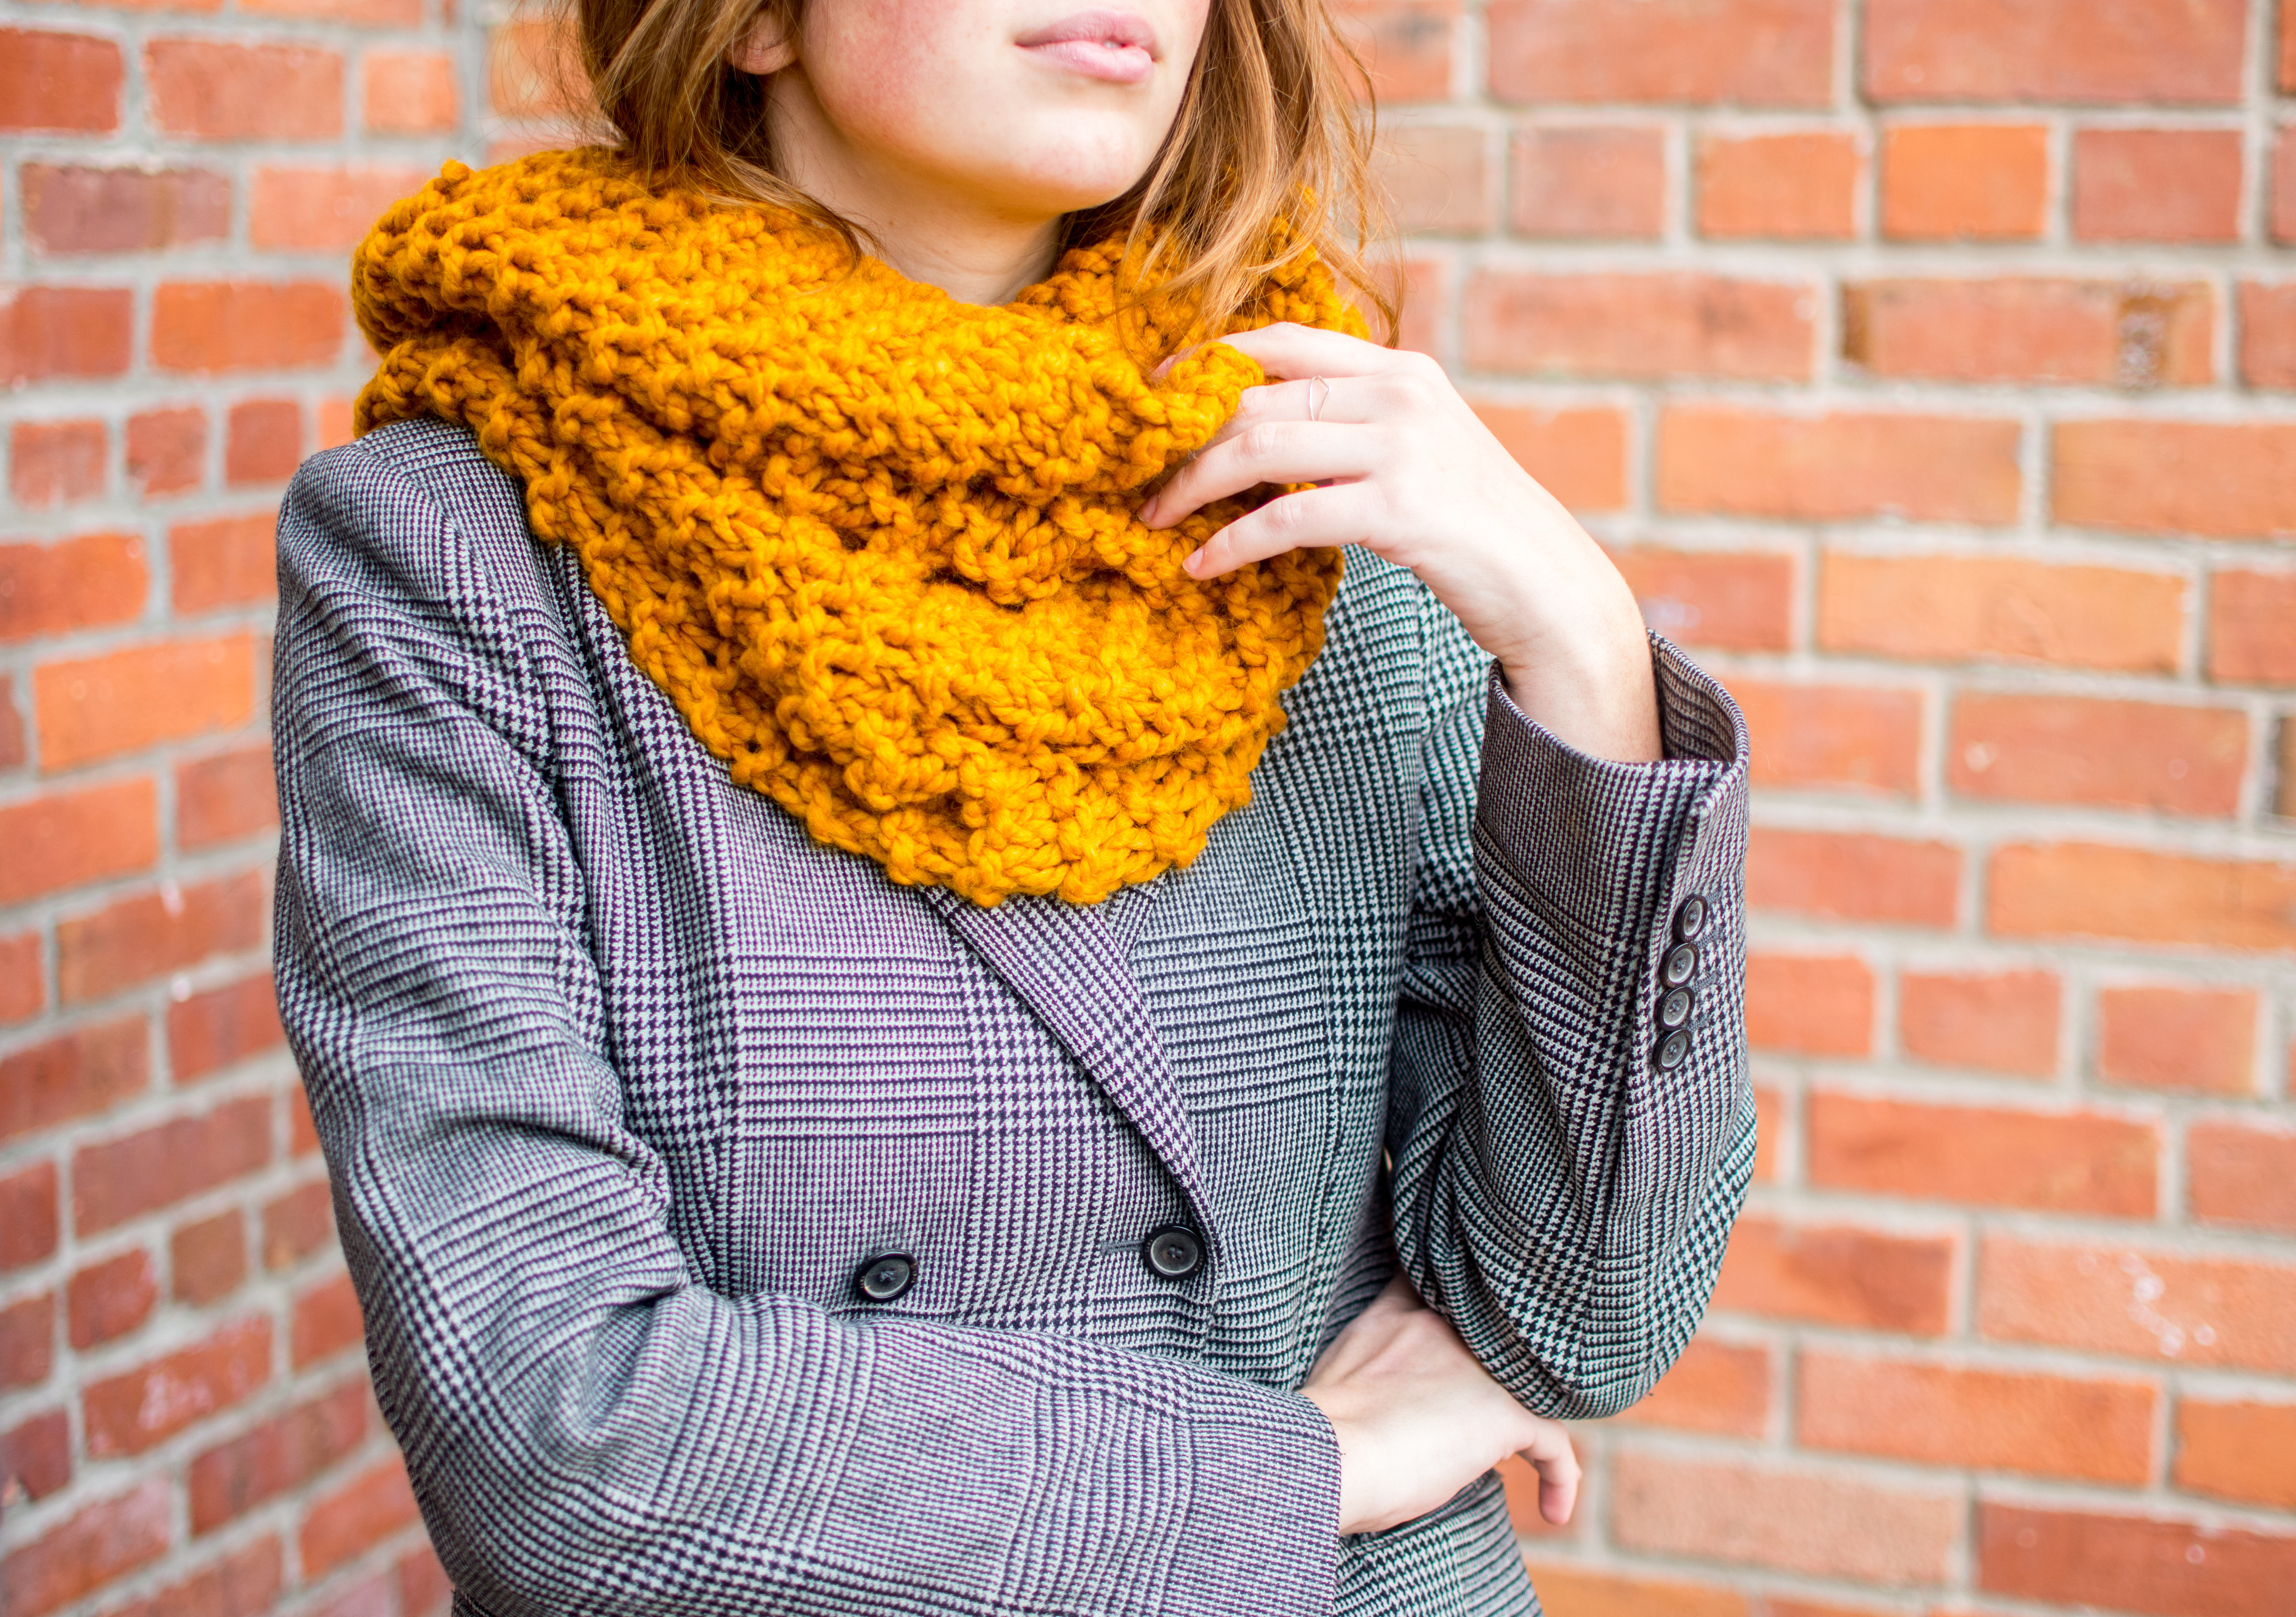 Cozy hand-knit scarf by Squeak & Moon, $79